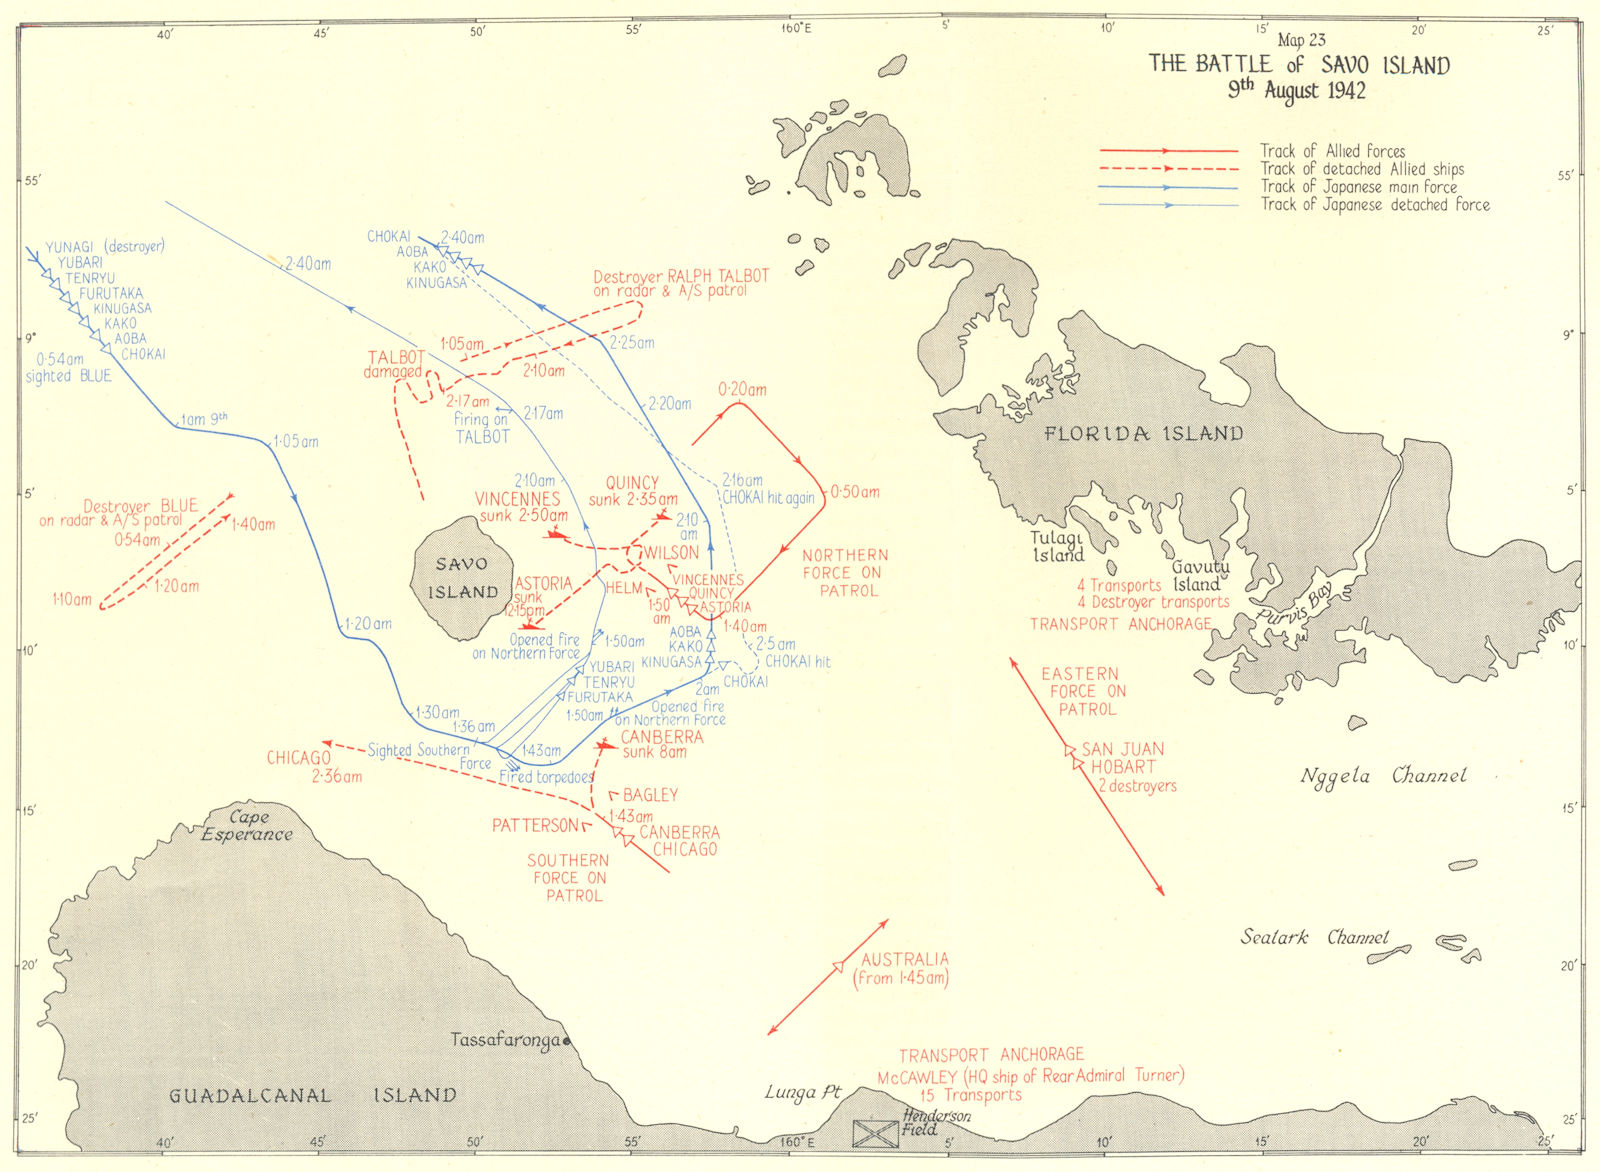 PACIFIC OCEAN. The Battle of Savo Island 9th August 1942 1956 old vintage map